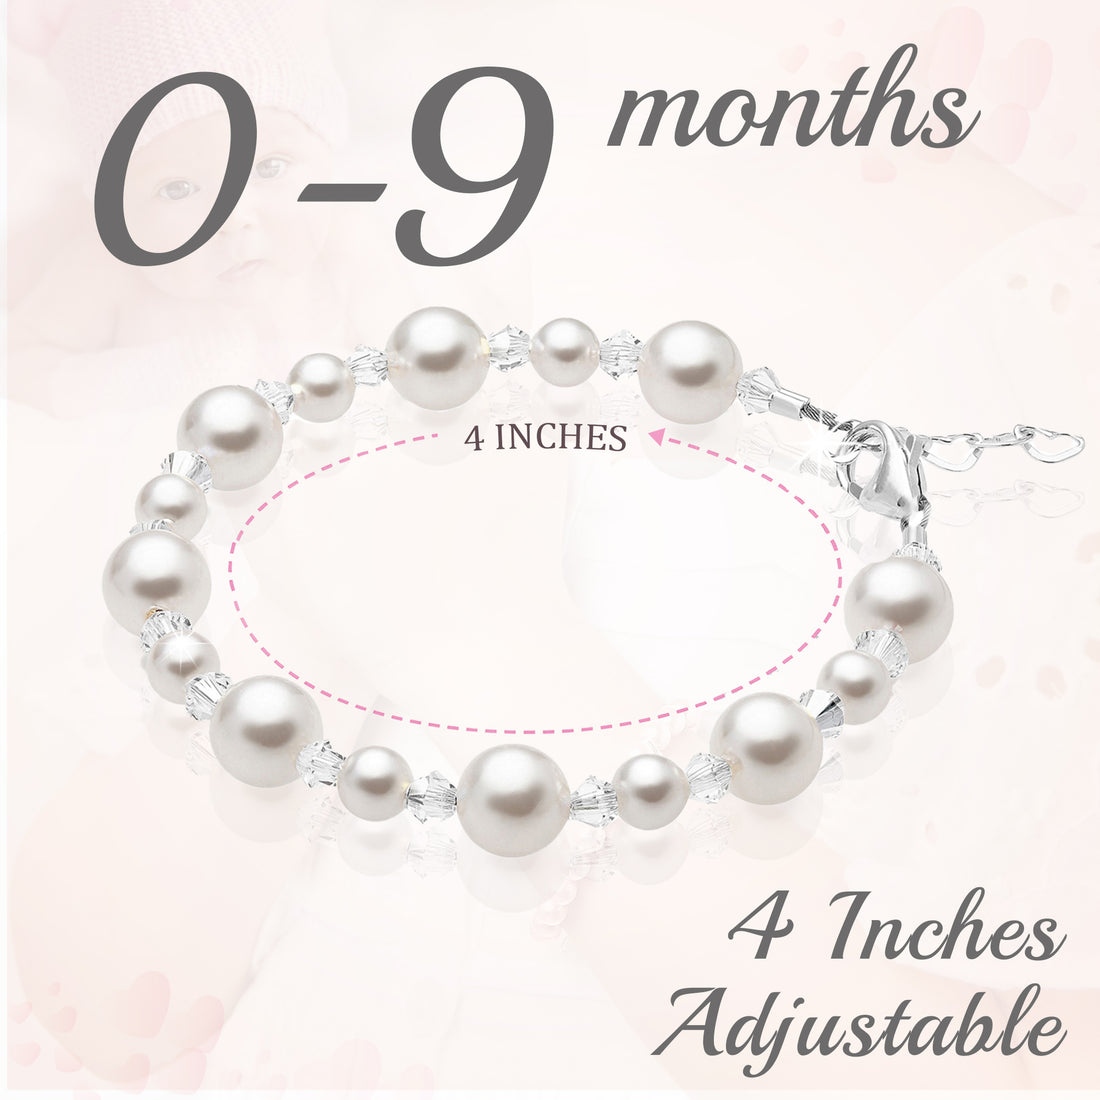 NewBorn Baby Girl Bracelet with White Pearls & Clear Crystals